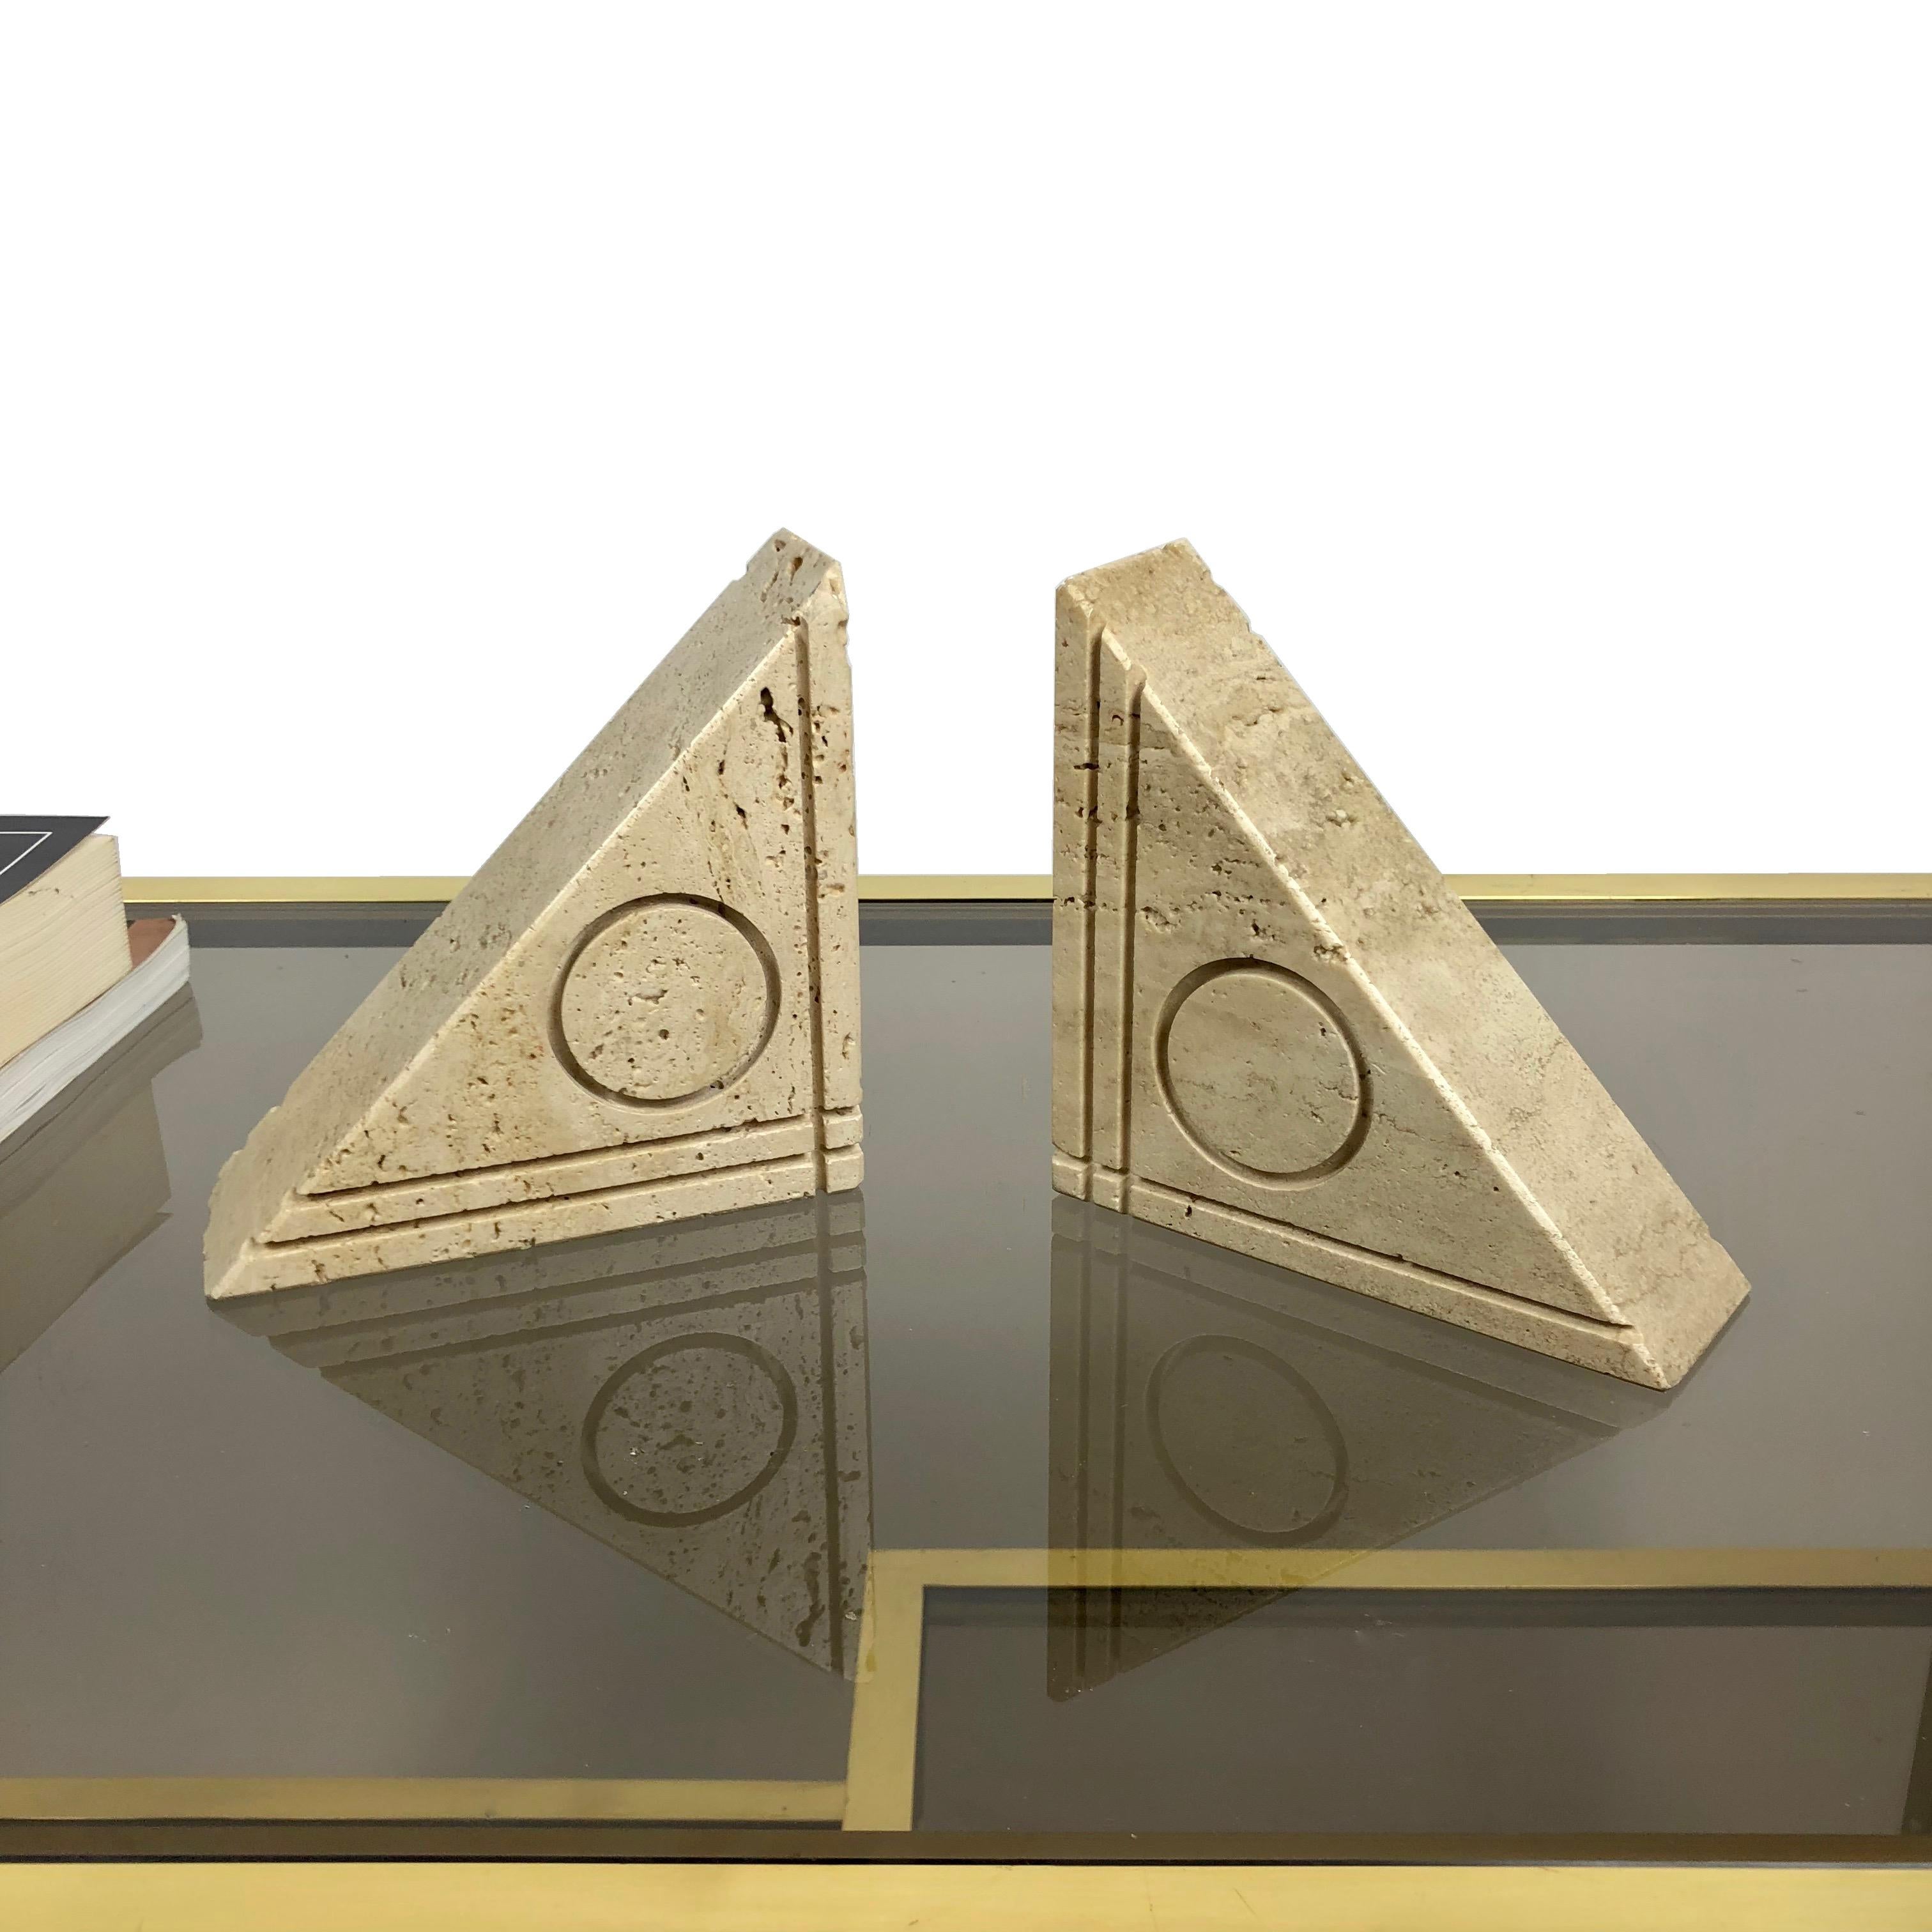 Late 20th Century Pair of Travertine Bookends in the Style of the Italian Angelo Mangiarotti 1970s